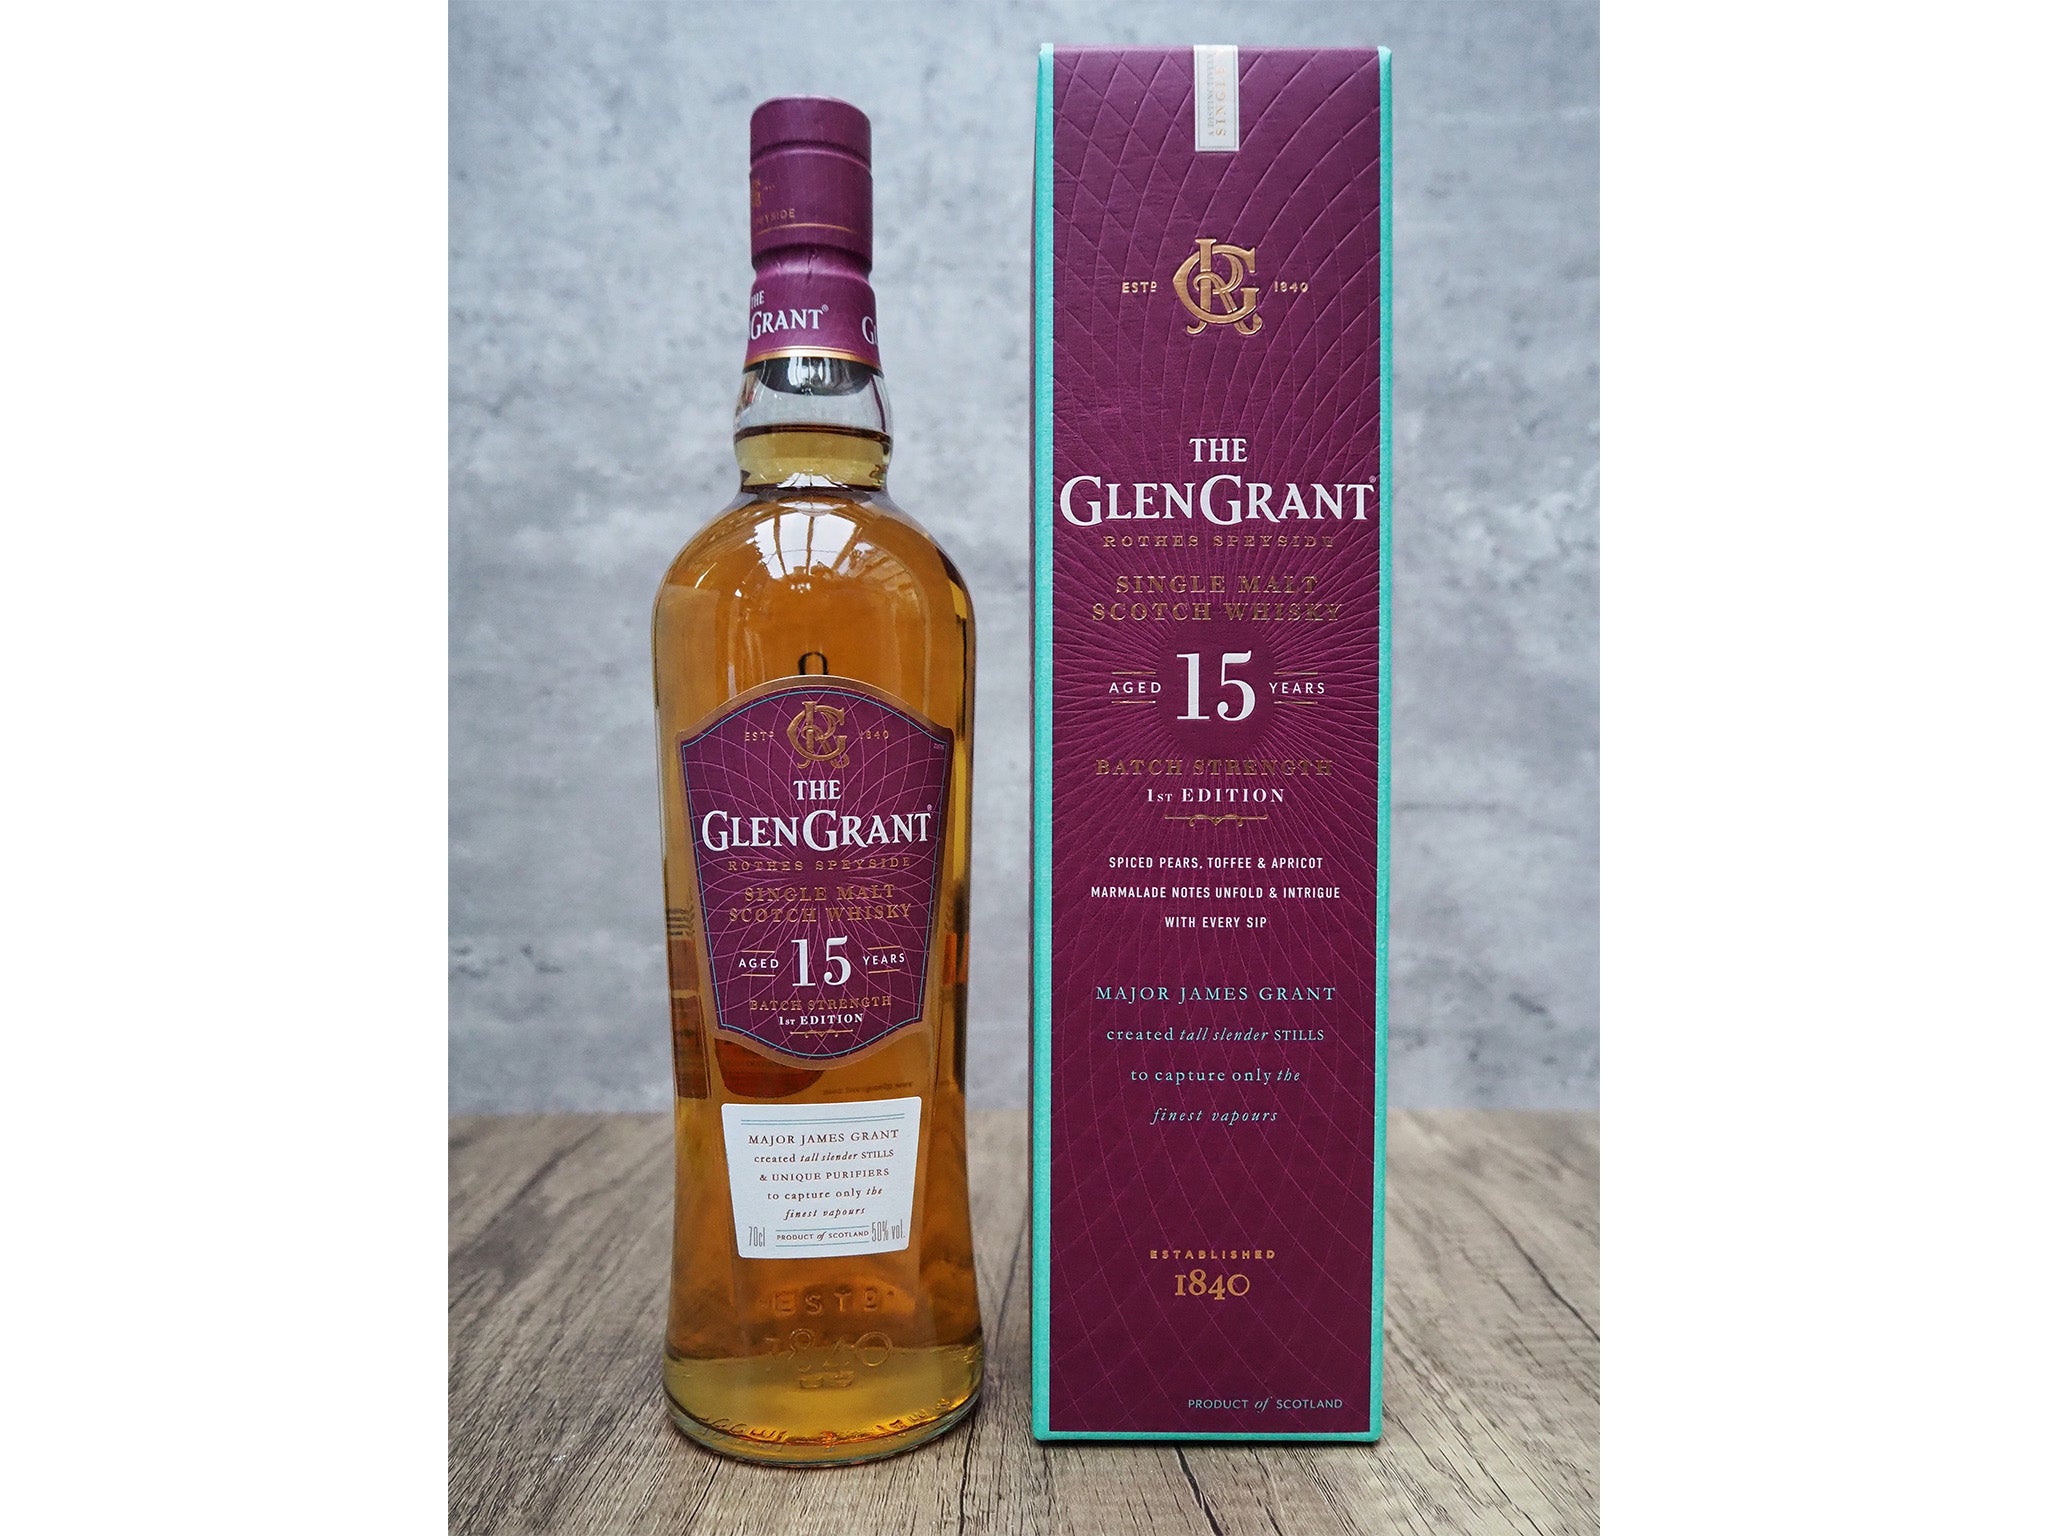 The Glen Grant 15 year old